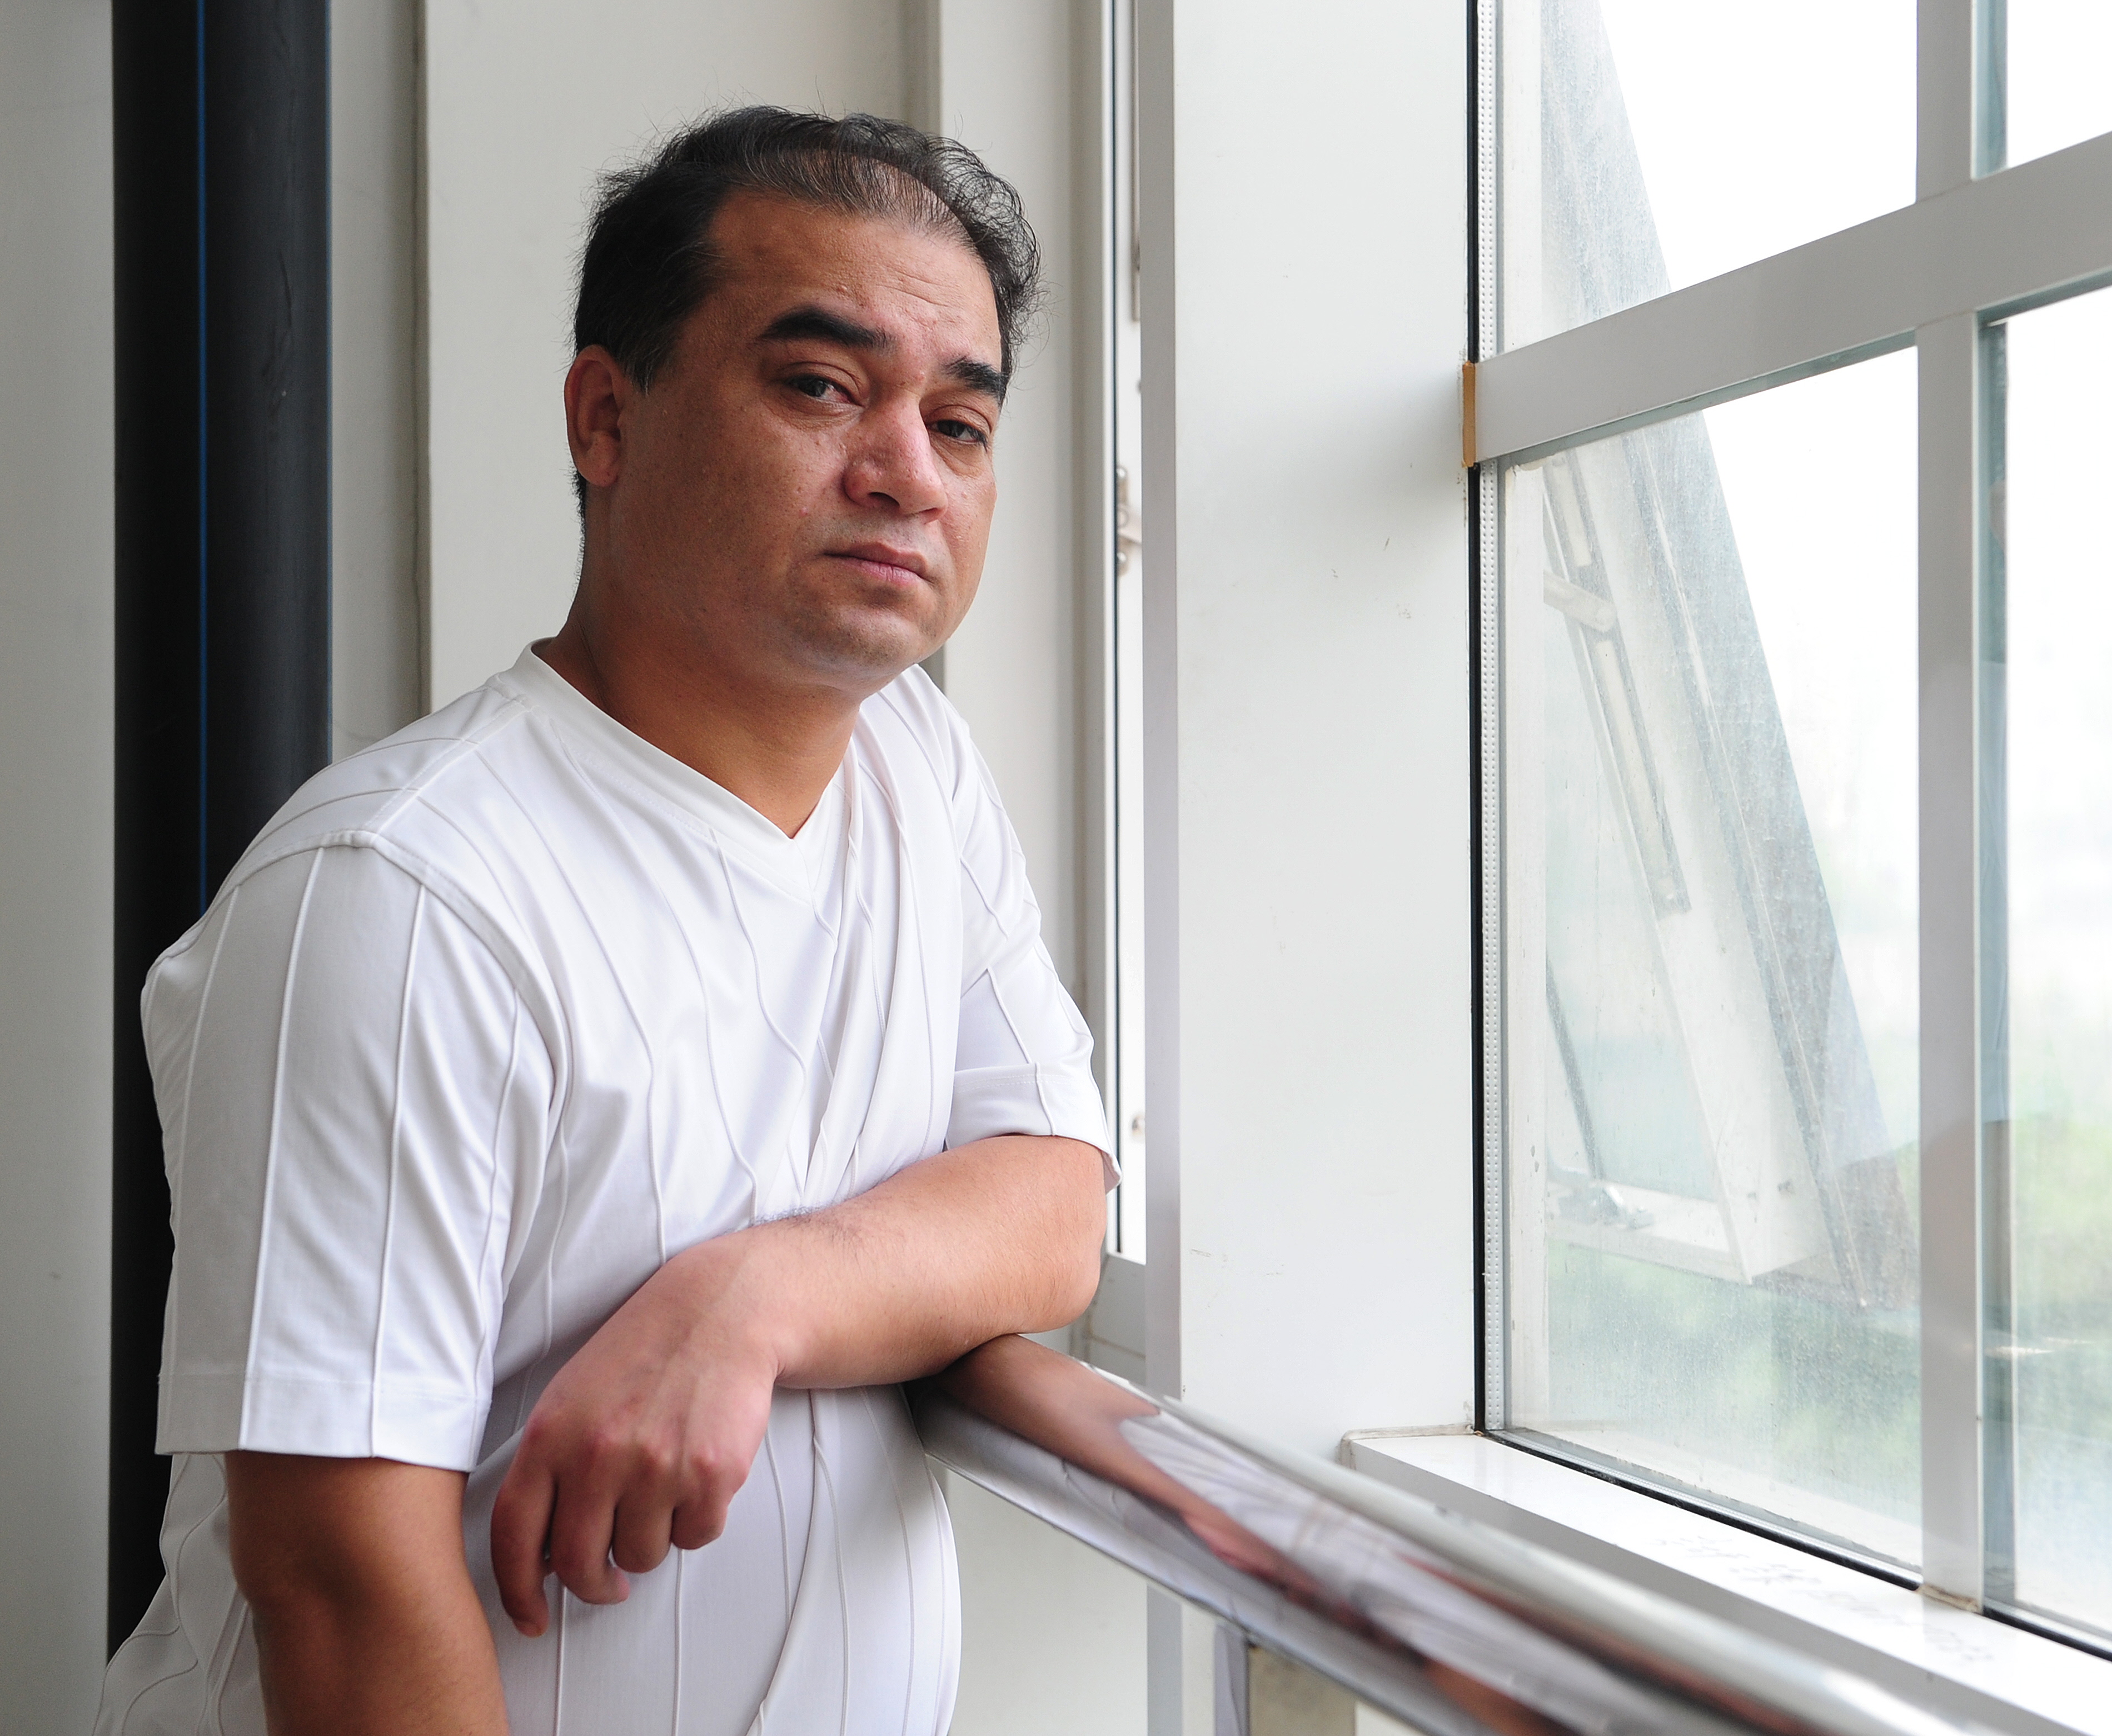 University professor, blogger, and member of the Muslim Uighur minority, Ilham Tohti  pauses before a classroom lecture in Beijing on June 12, 2010. (Frederic J. Brown—AFP/Getty)